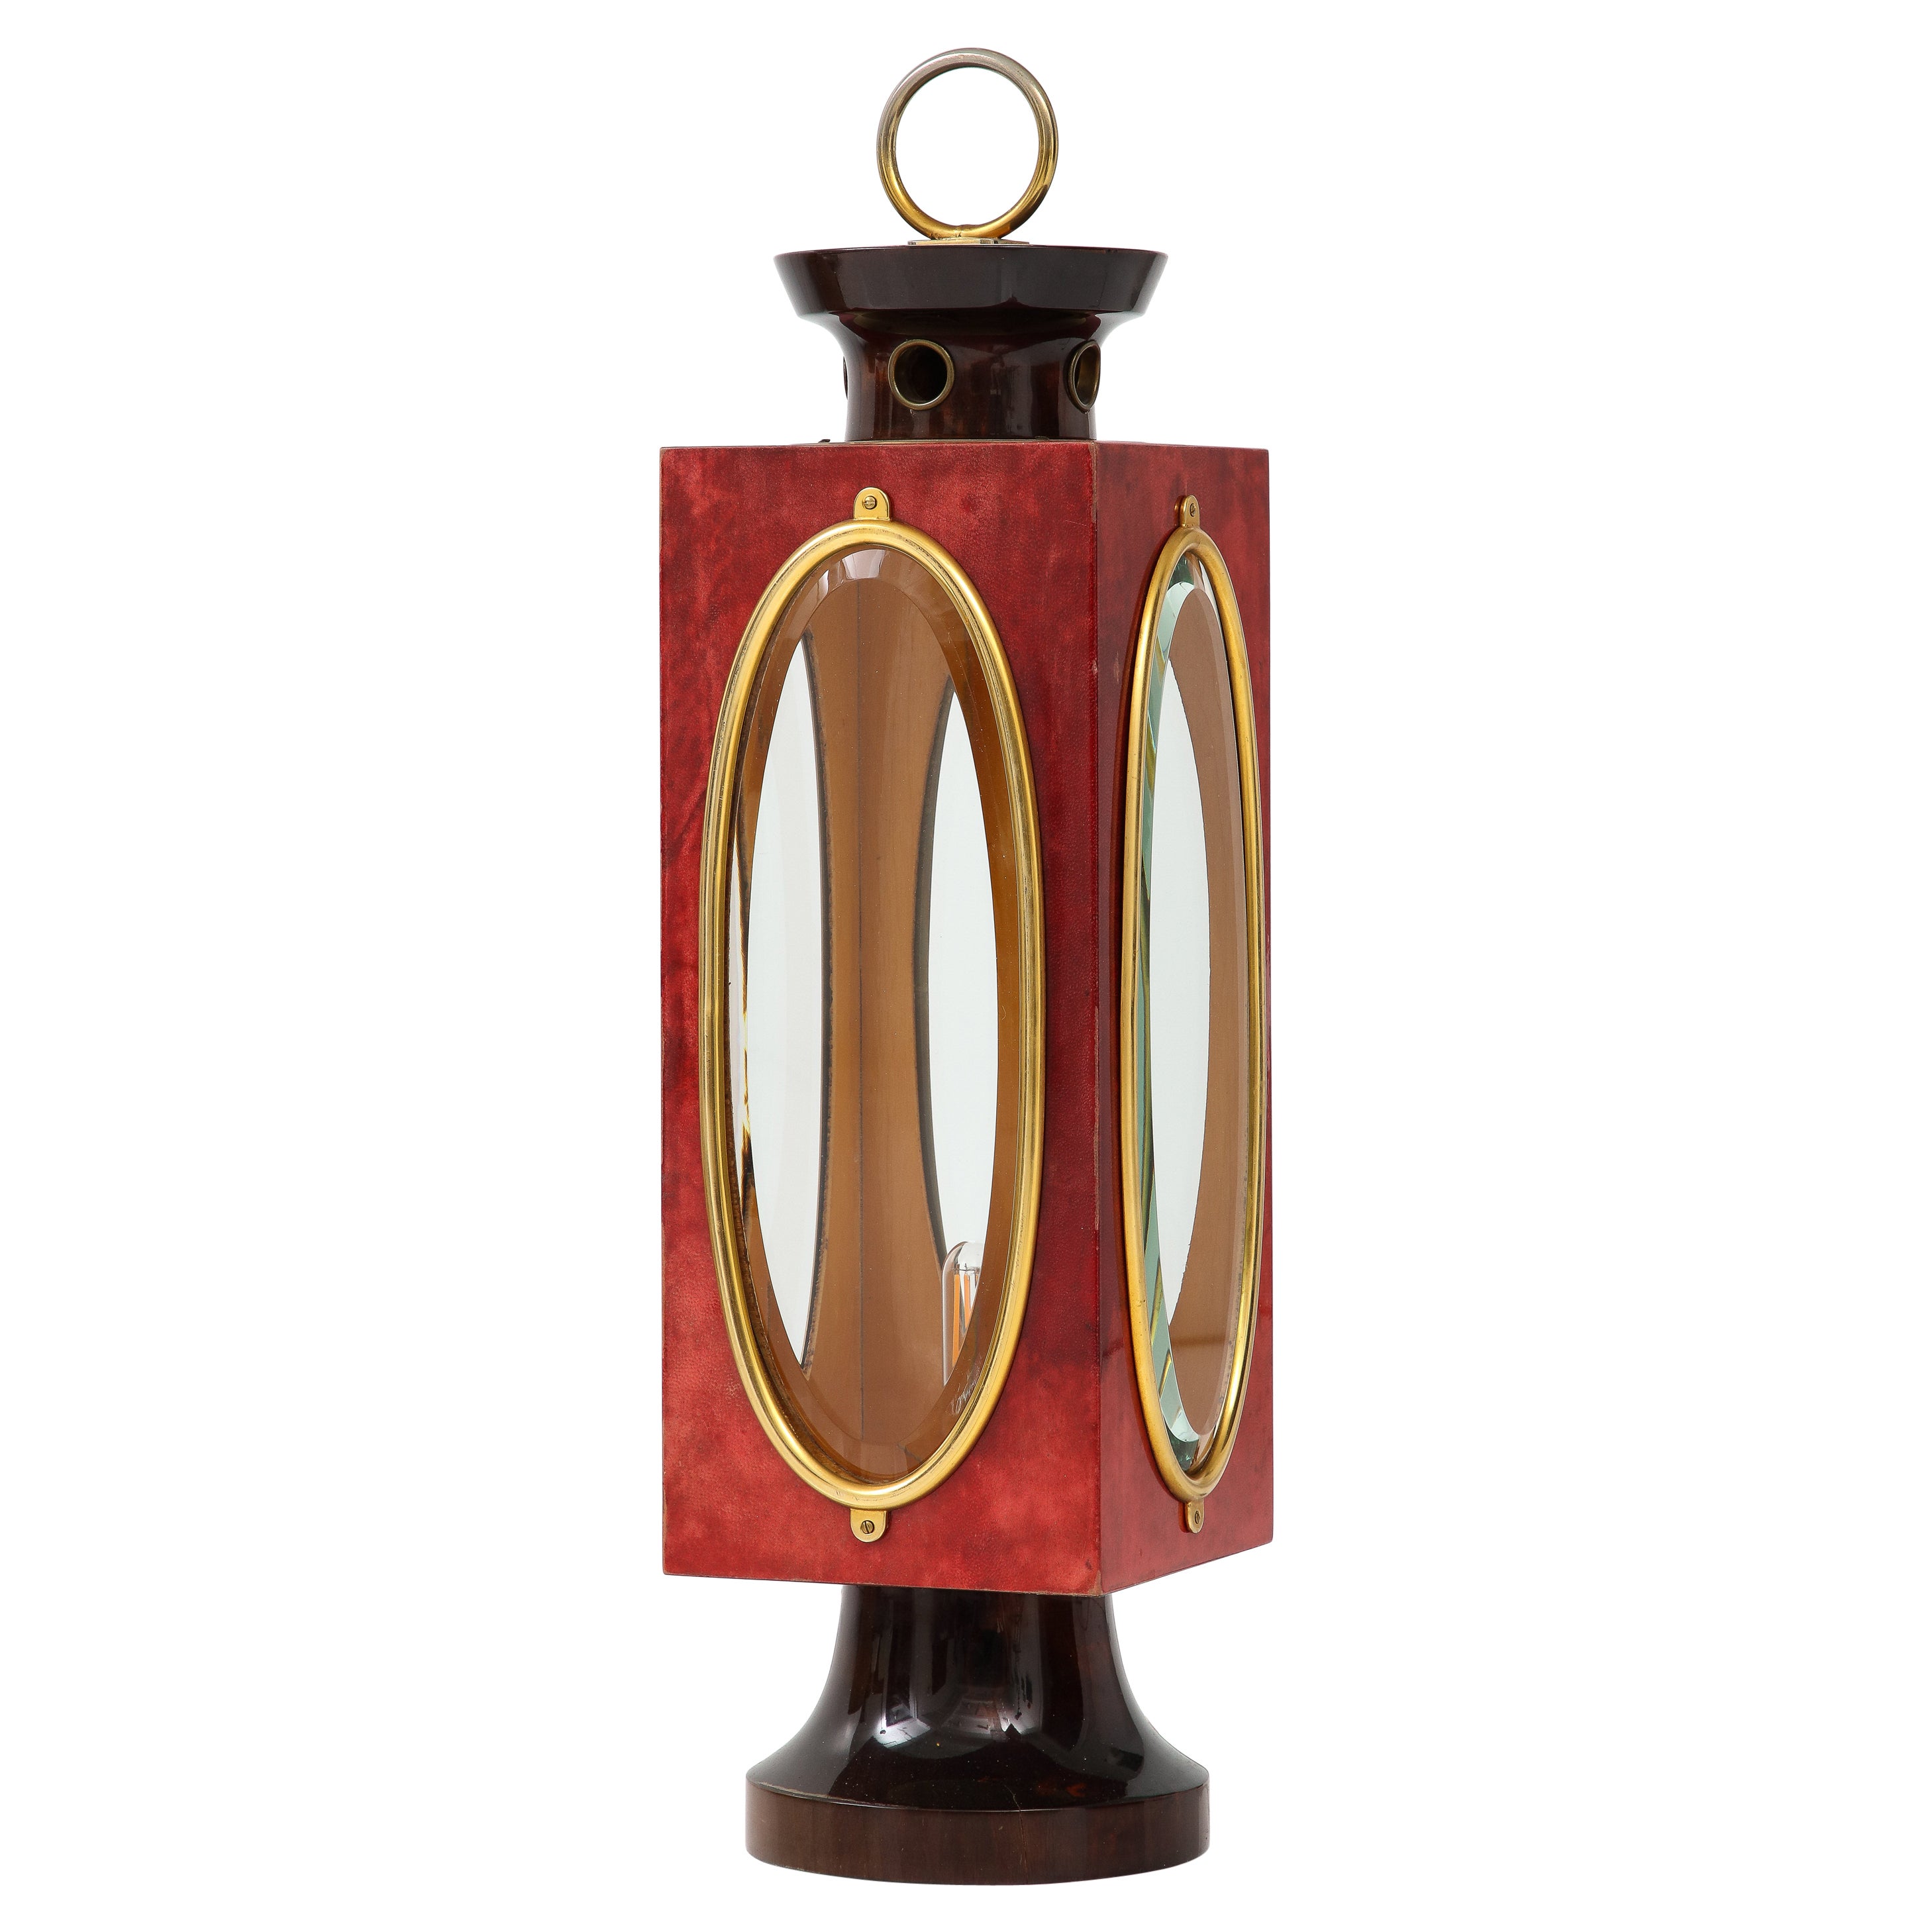 Signed Red Velum and Lacquered Wood Table Lantern Lamp, Aldo Tura, Italy, 1970s